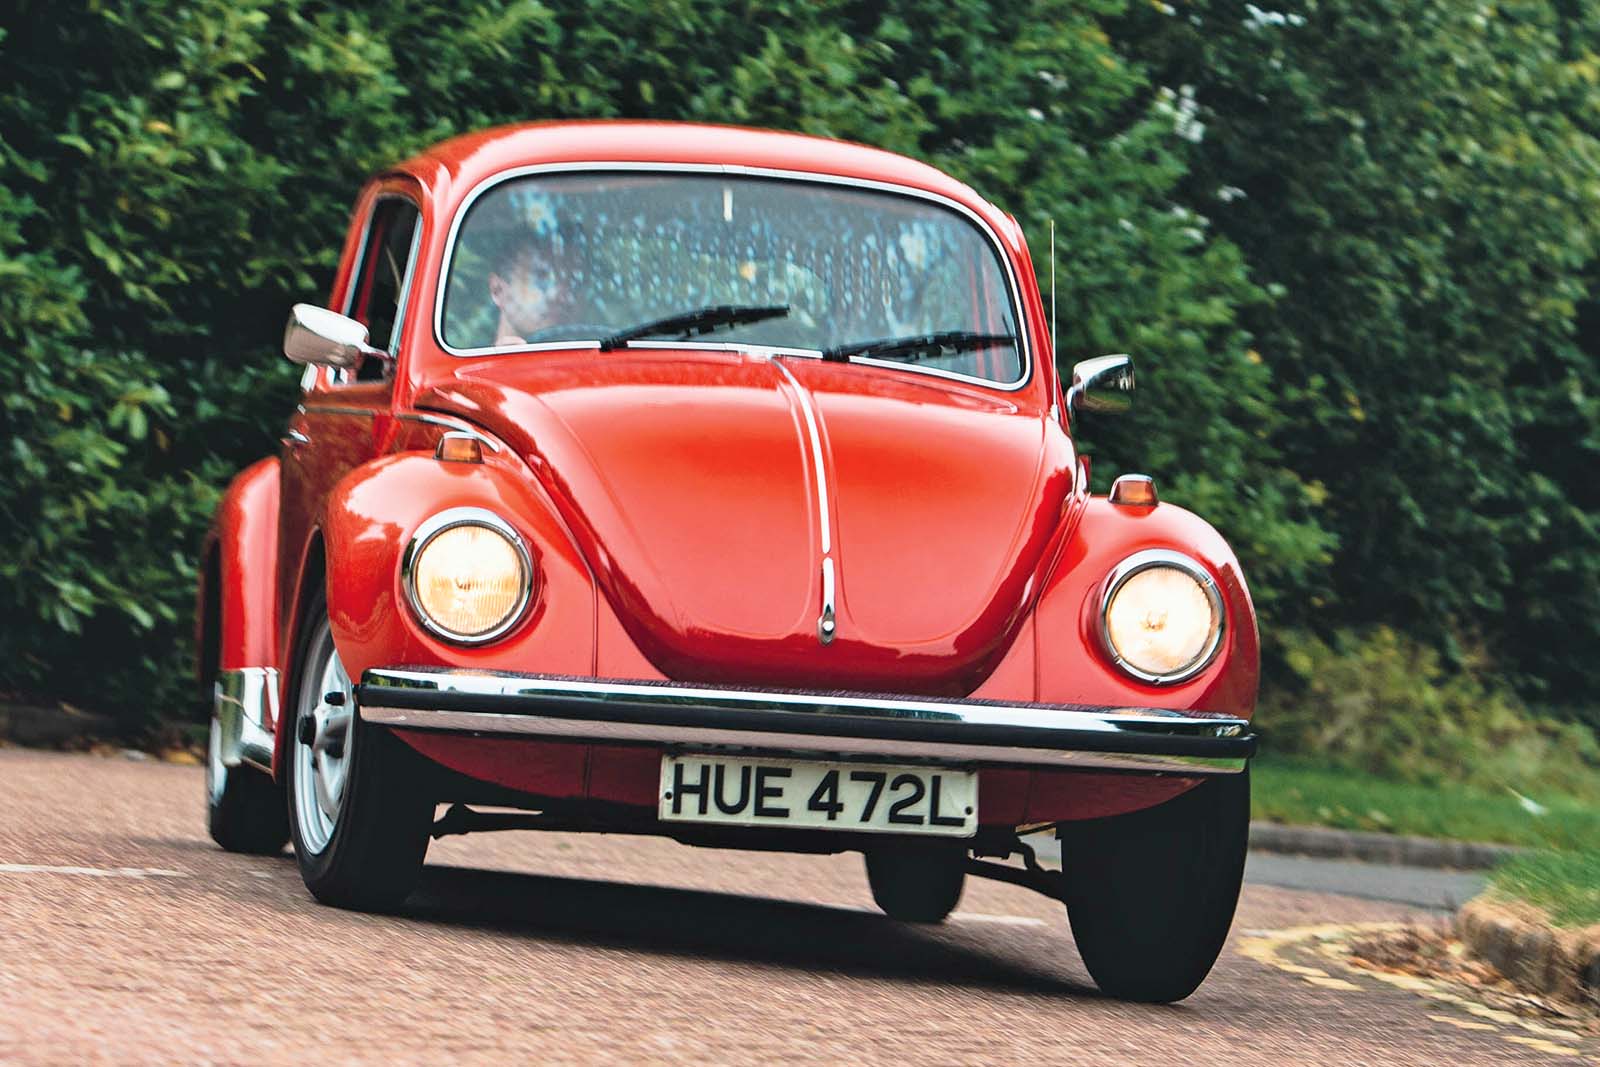 Bug life: everyday motoring in a 52-year-old car